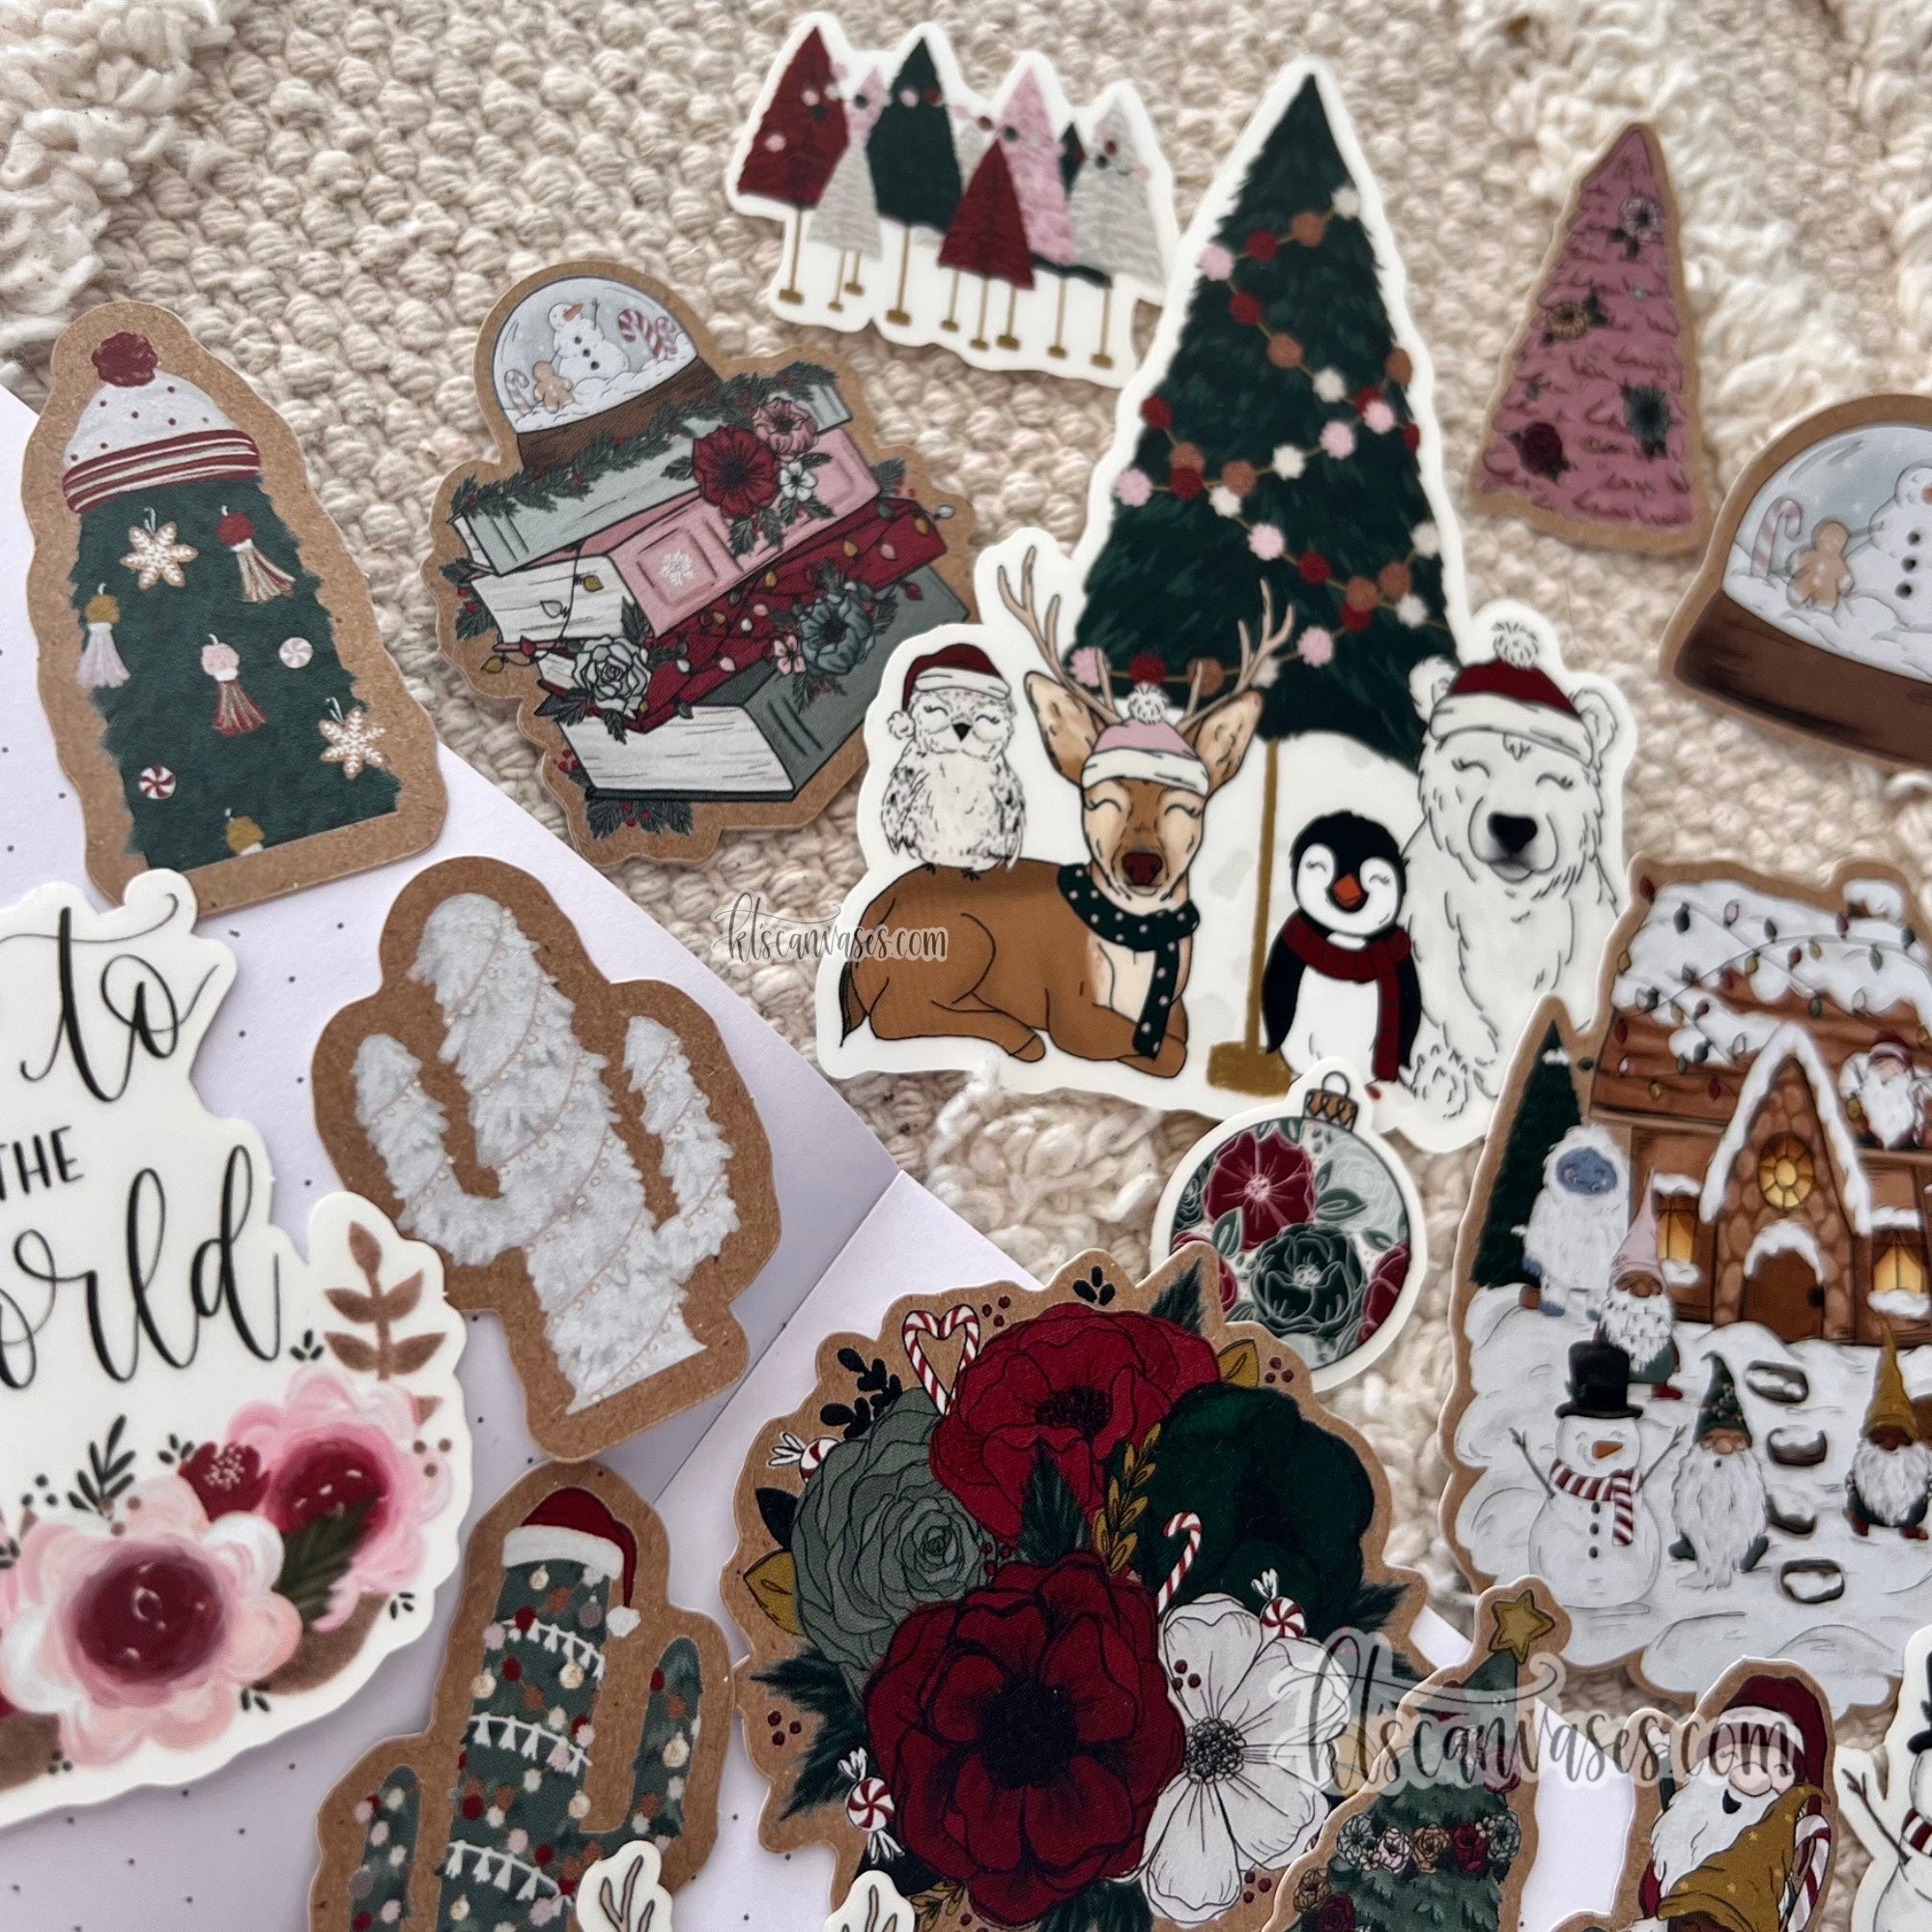 Mystery Sticker Pack: Pink Stickers (30% off discount included) – KT's  Canvases